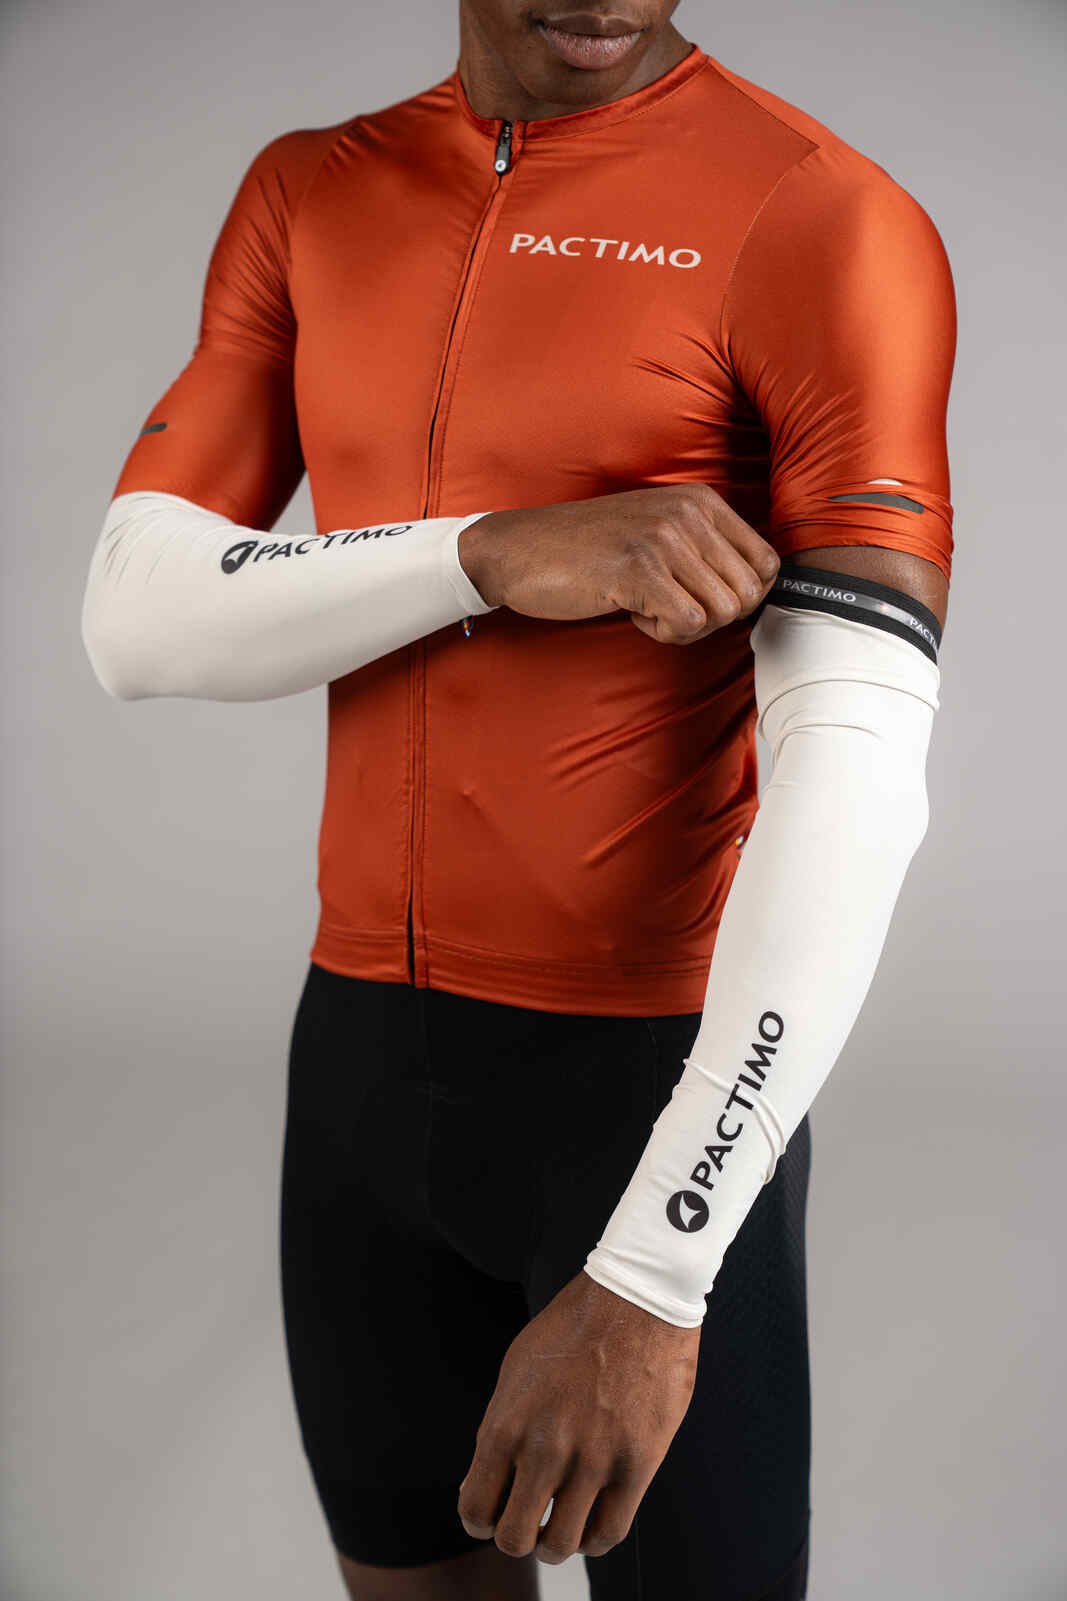 White Cycling Sun Sleeves Gripper